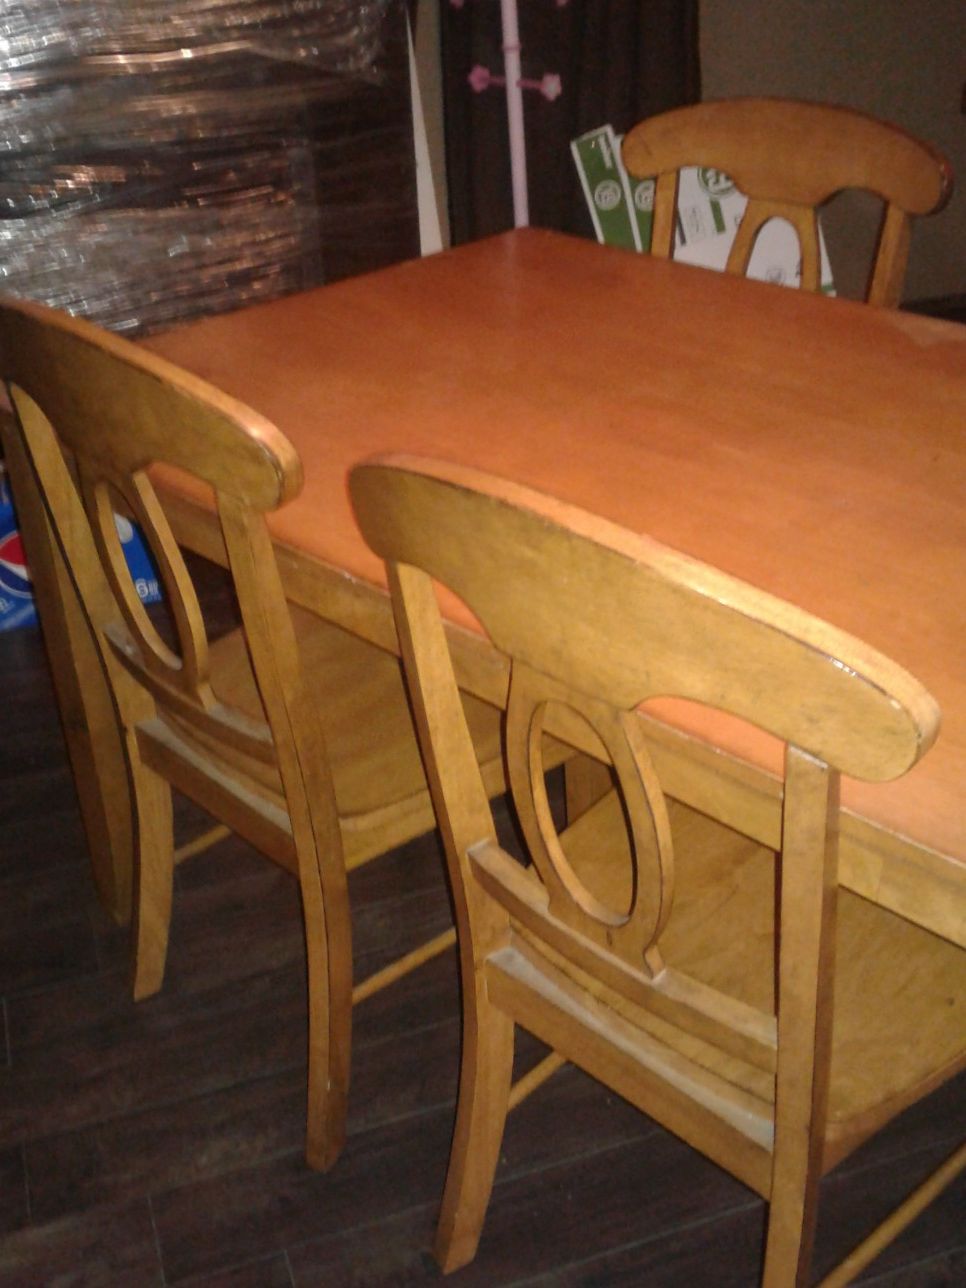 Wood table has 4 chairs good conditon